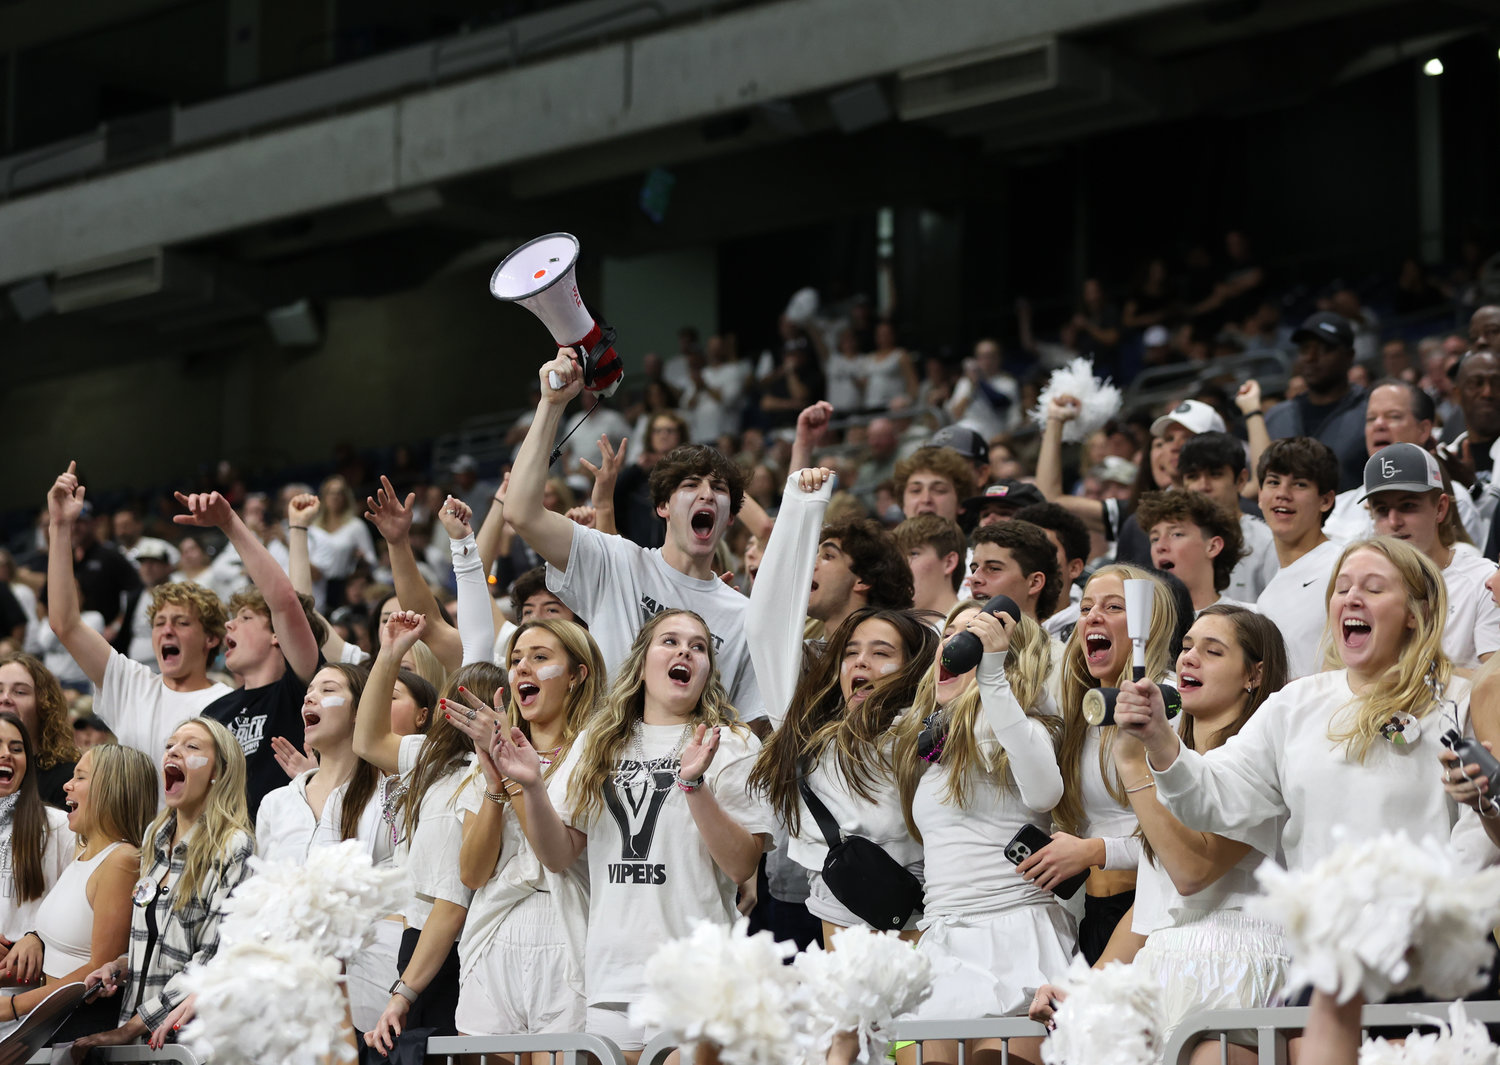 The Vandegrift student section cheers during the Class 6A-DII state semifinal football game between Katy and Vandegrift on Dec. 10, 2022 in San Antonio.